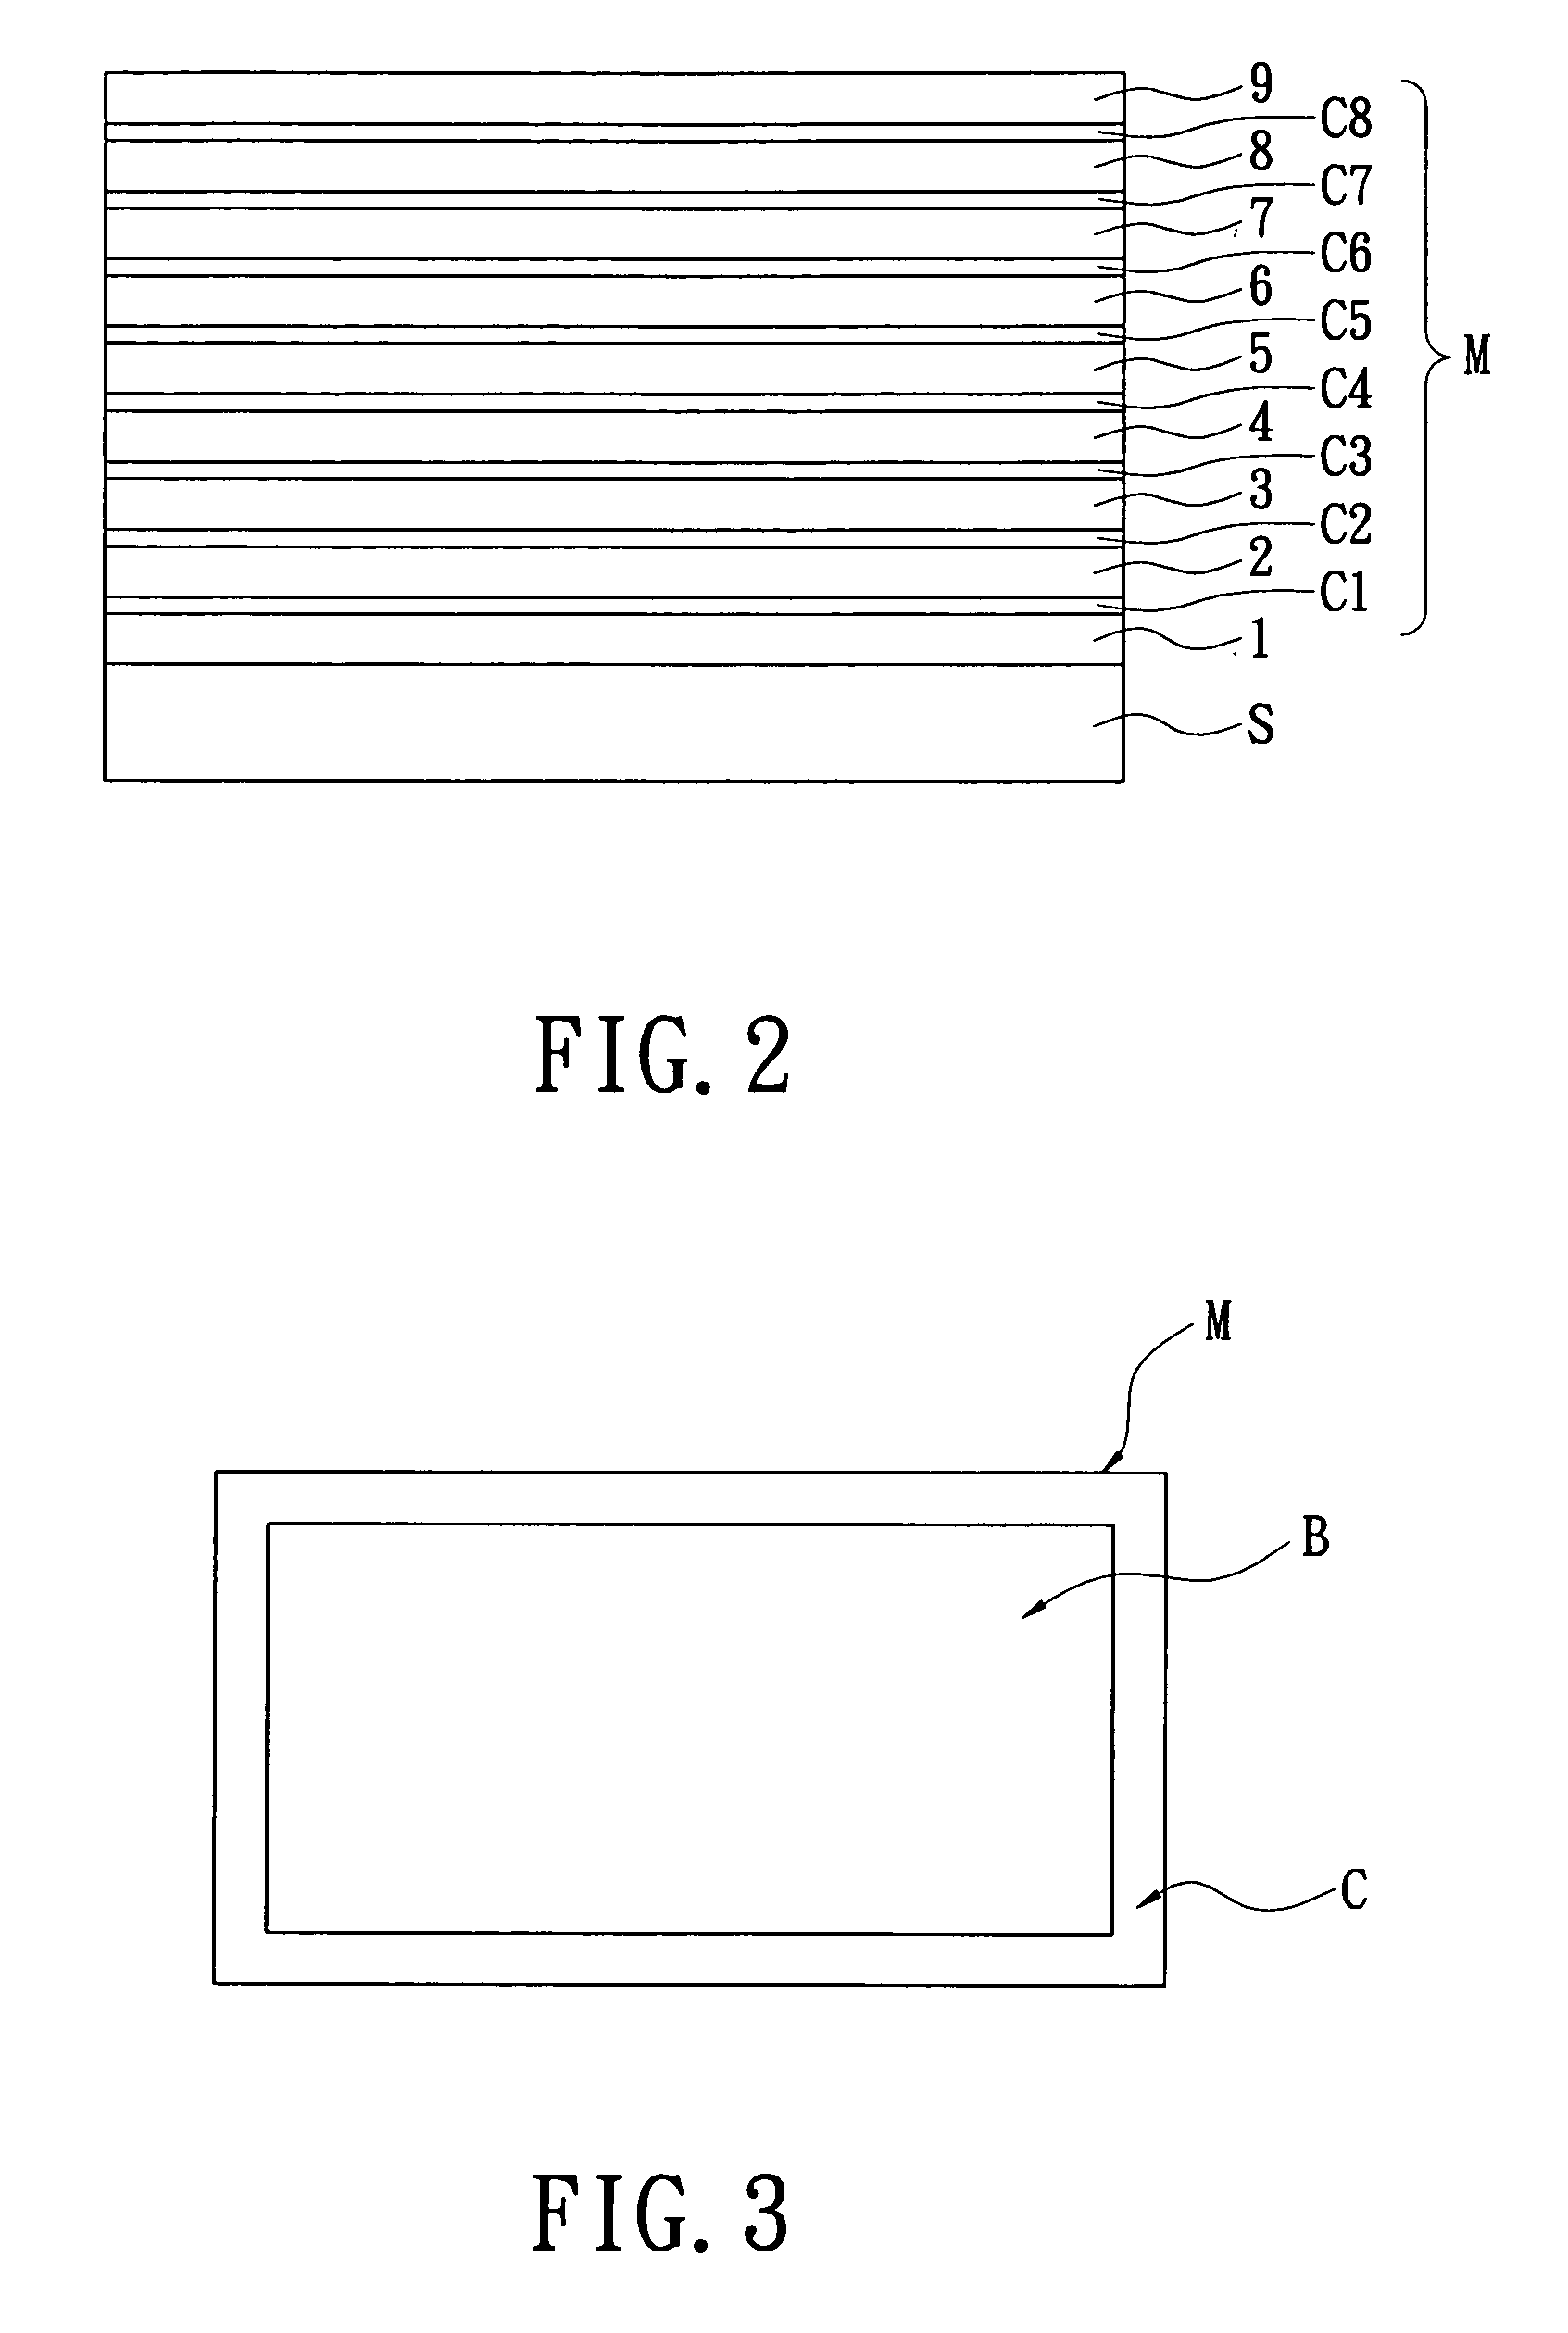 Extreme low resistivity light attenuation anti-reflection coating structure in order to increase transmittance of blue light and method for manufacturing the same